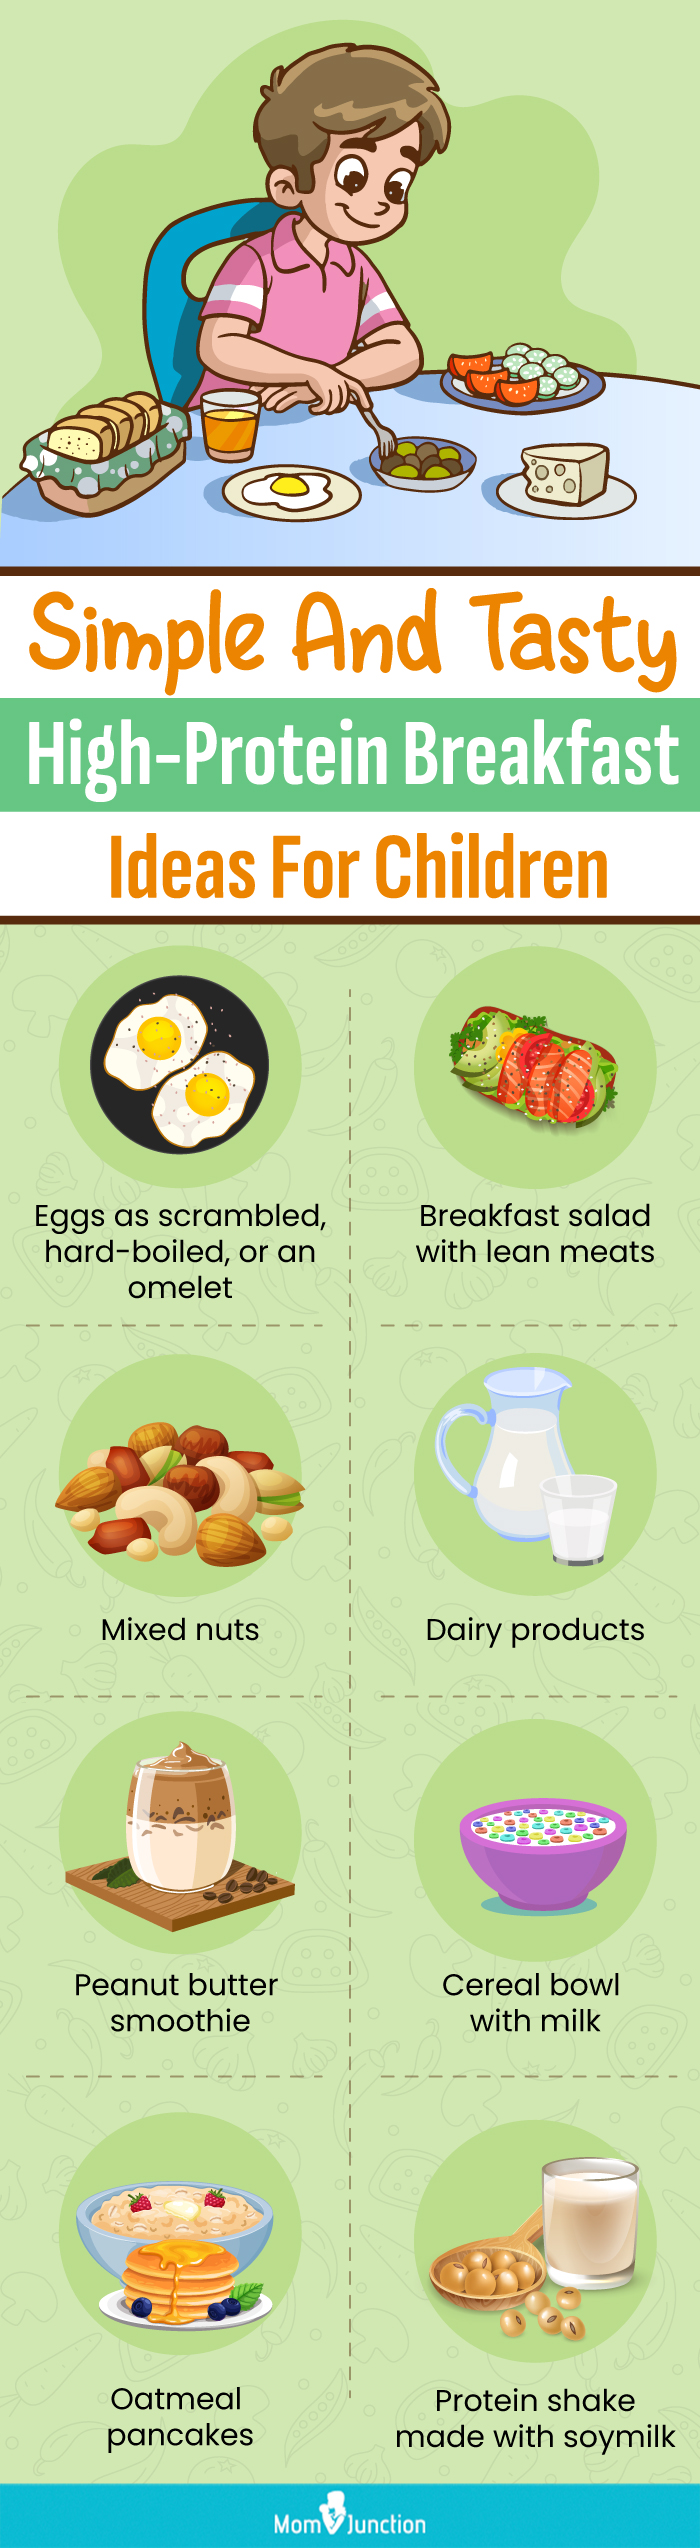 simple and tasty high protein breakfast ideas for children (infographic)